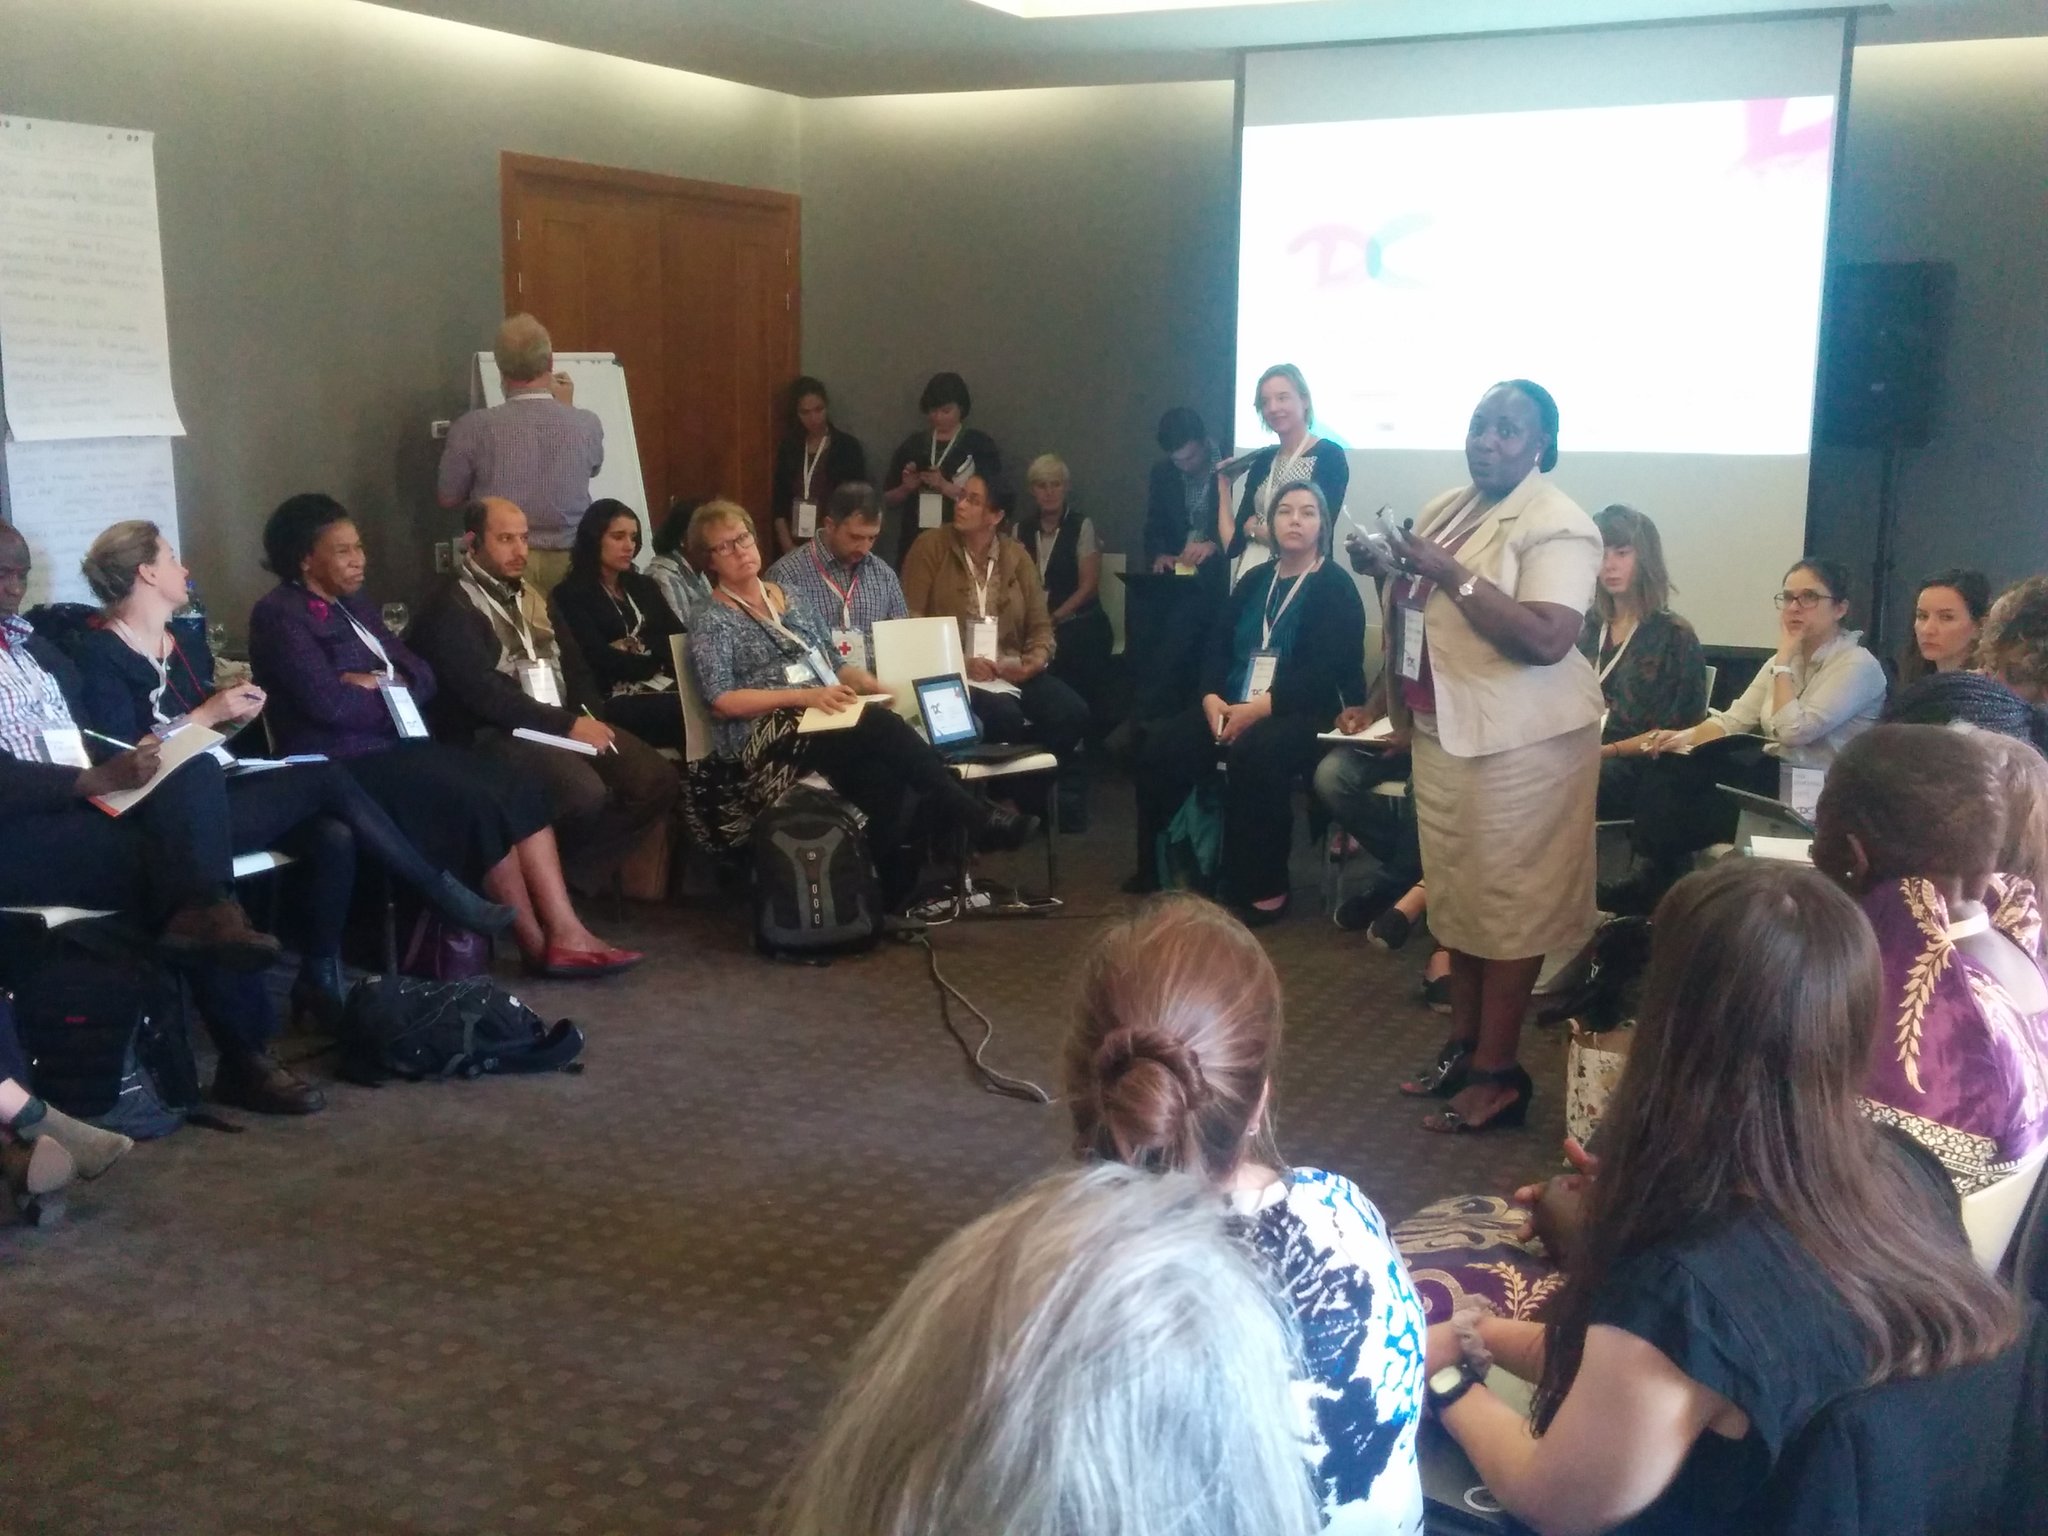 A packed room at #DCdays listens to @TKajumba discuss her experience in Uganda of how to integrate local voices at national levels https://t.co/tms8xcuD4W